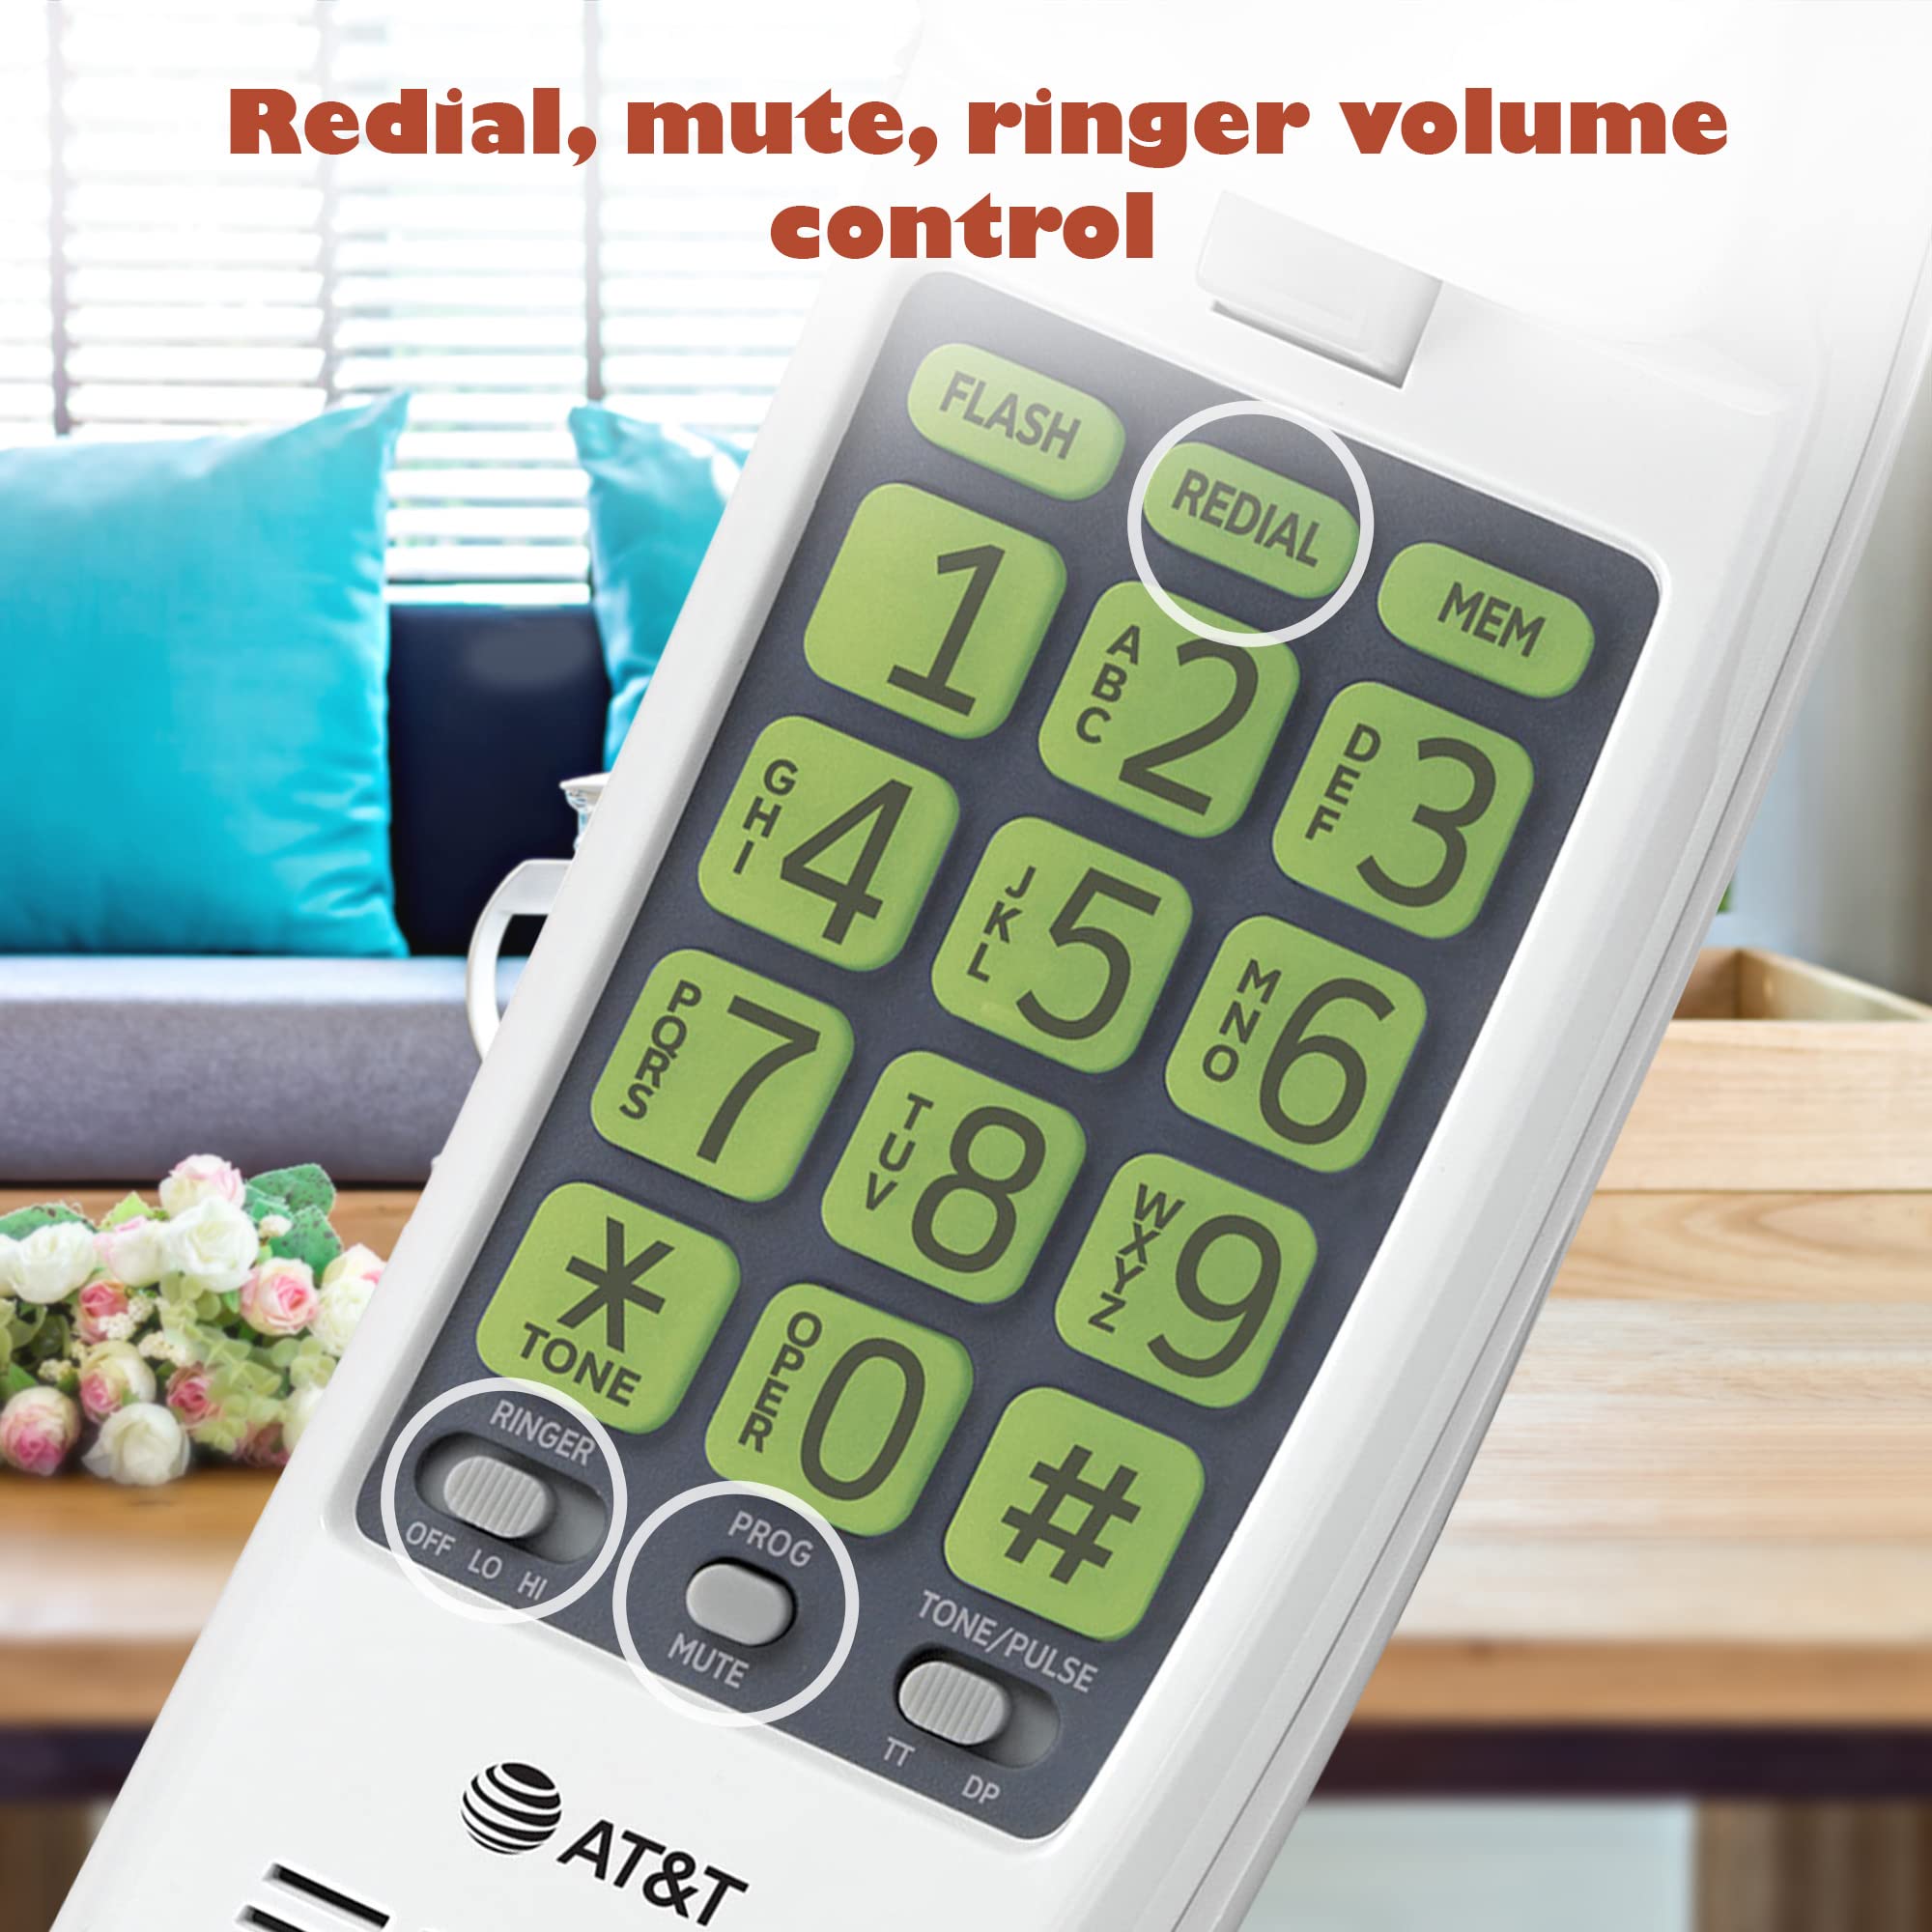 AT&T TRIMLINE 213 Corded Home Phone with Extra Big Buttons & Visual Ringer. No AC Power Required, Improved Easy-Wall-Mount, Lighted Keypad, 10 Speed Dial Keys, Volume Control, Senior Friendly. White